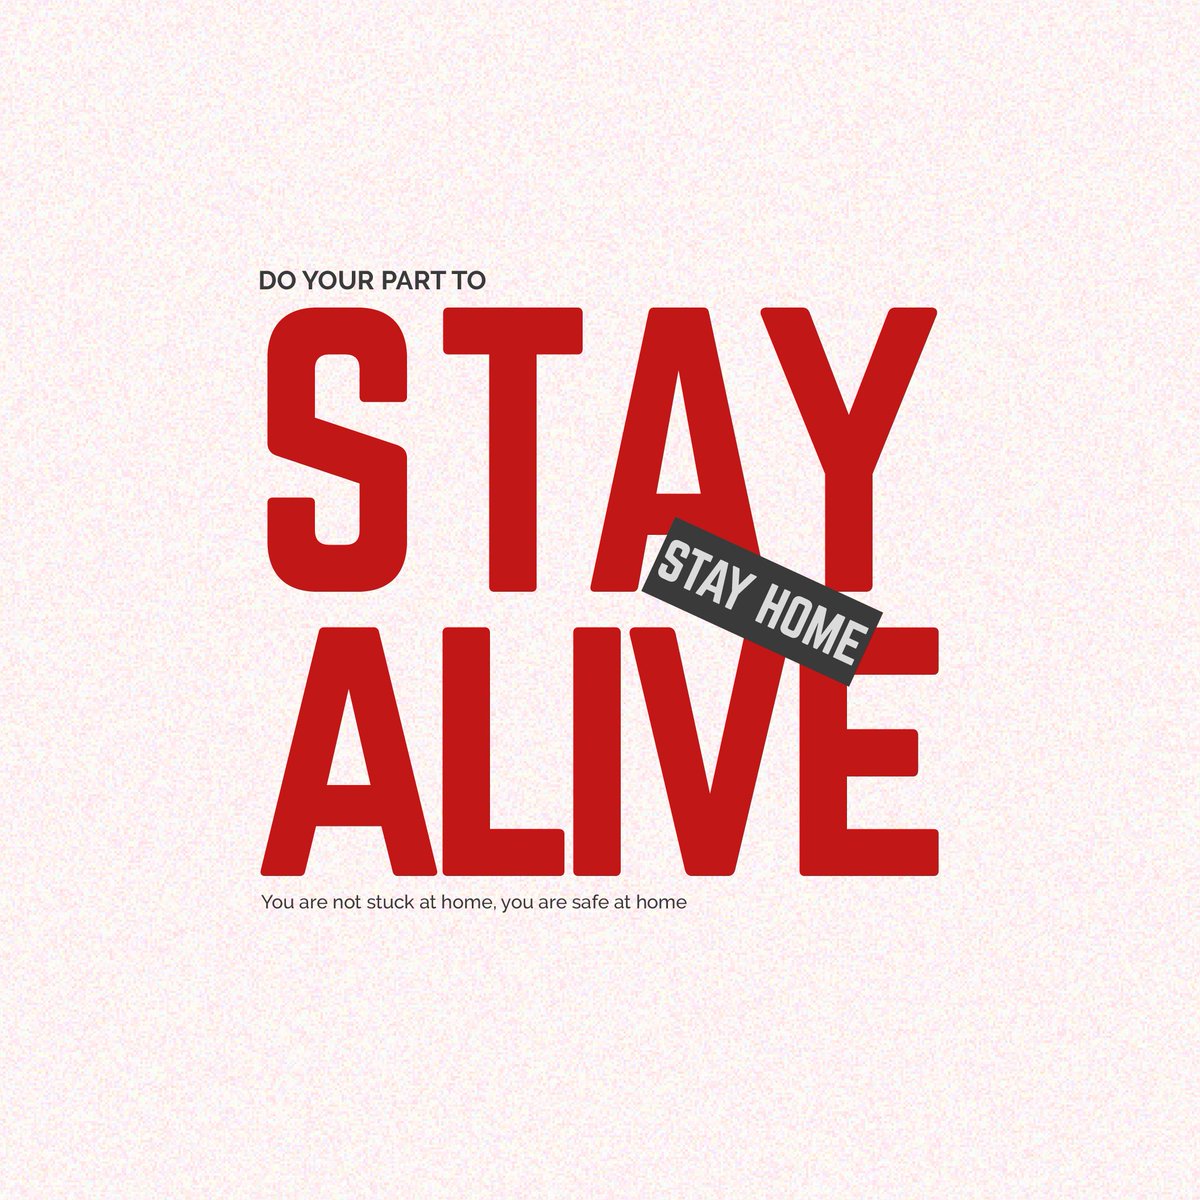 Do your part to stay alive.Stay at home #Designer  #Covid19 #staysafe  #StayHome